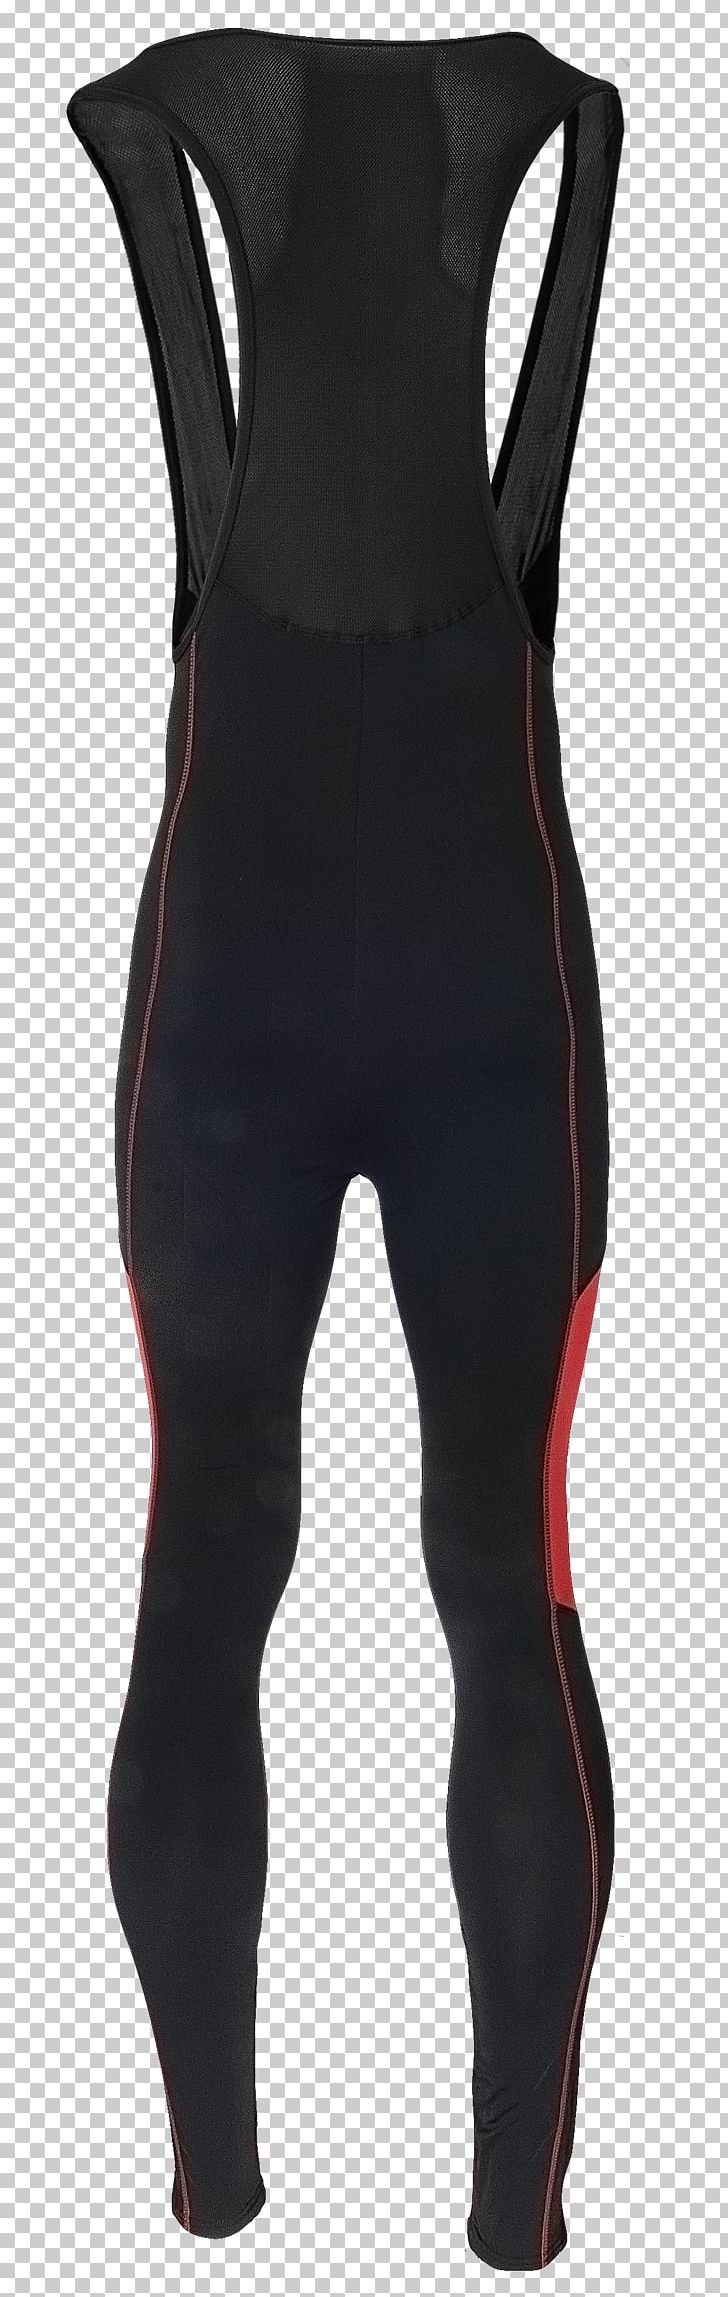 Wetsuit PNG, Clipart, Dungaree, Miscellaneous, Others, Personal Protective Equipment, Tights Free PNG Download